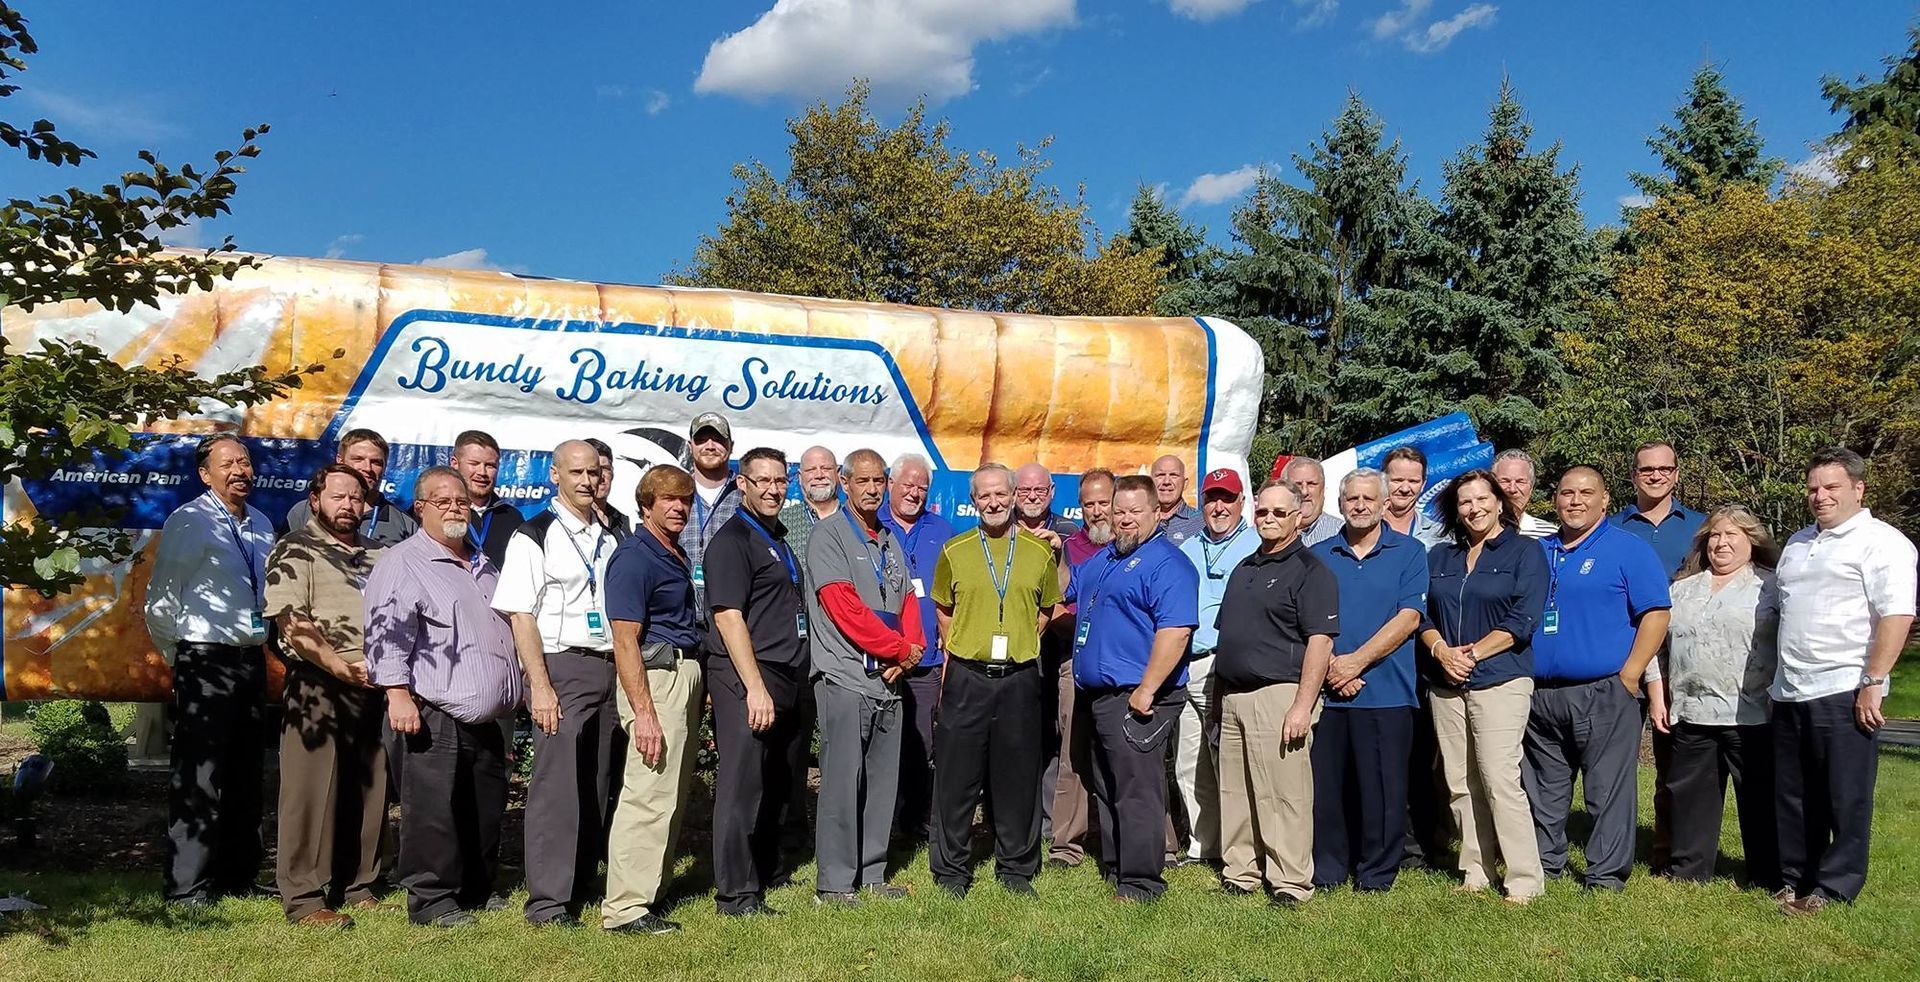 World's Largest Loaf of Bread Sculpture: world record in Urbana, Ohio